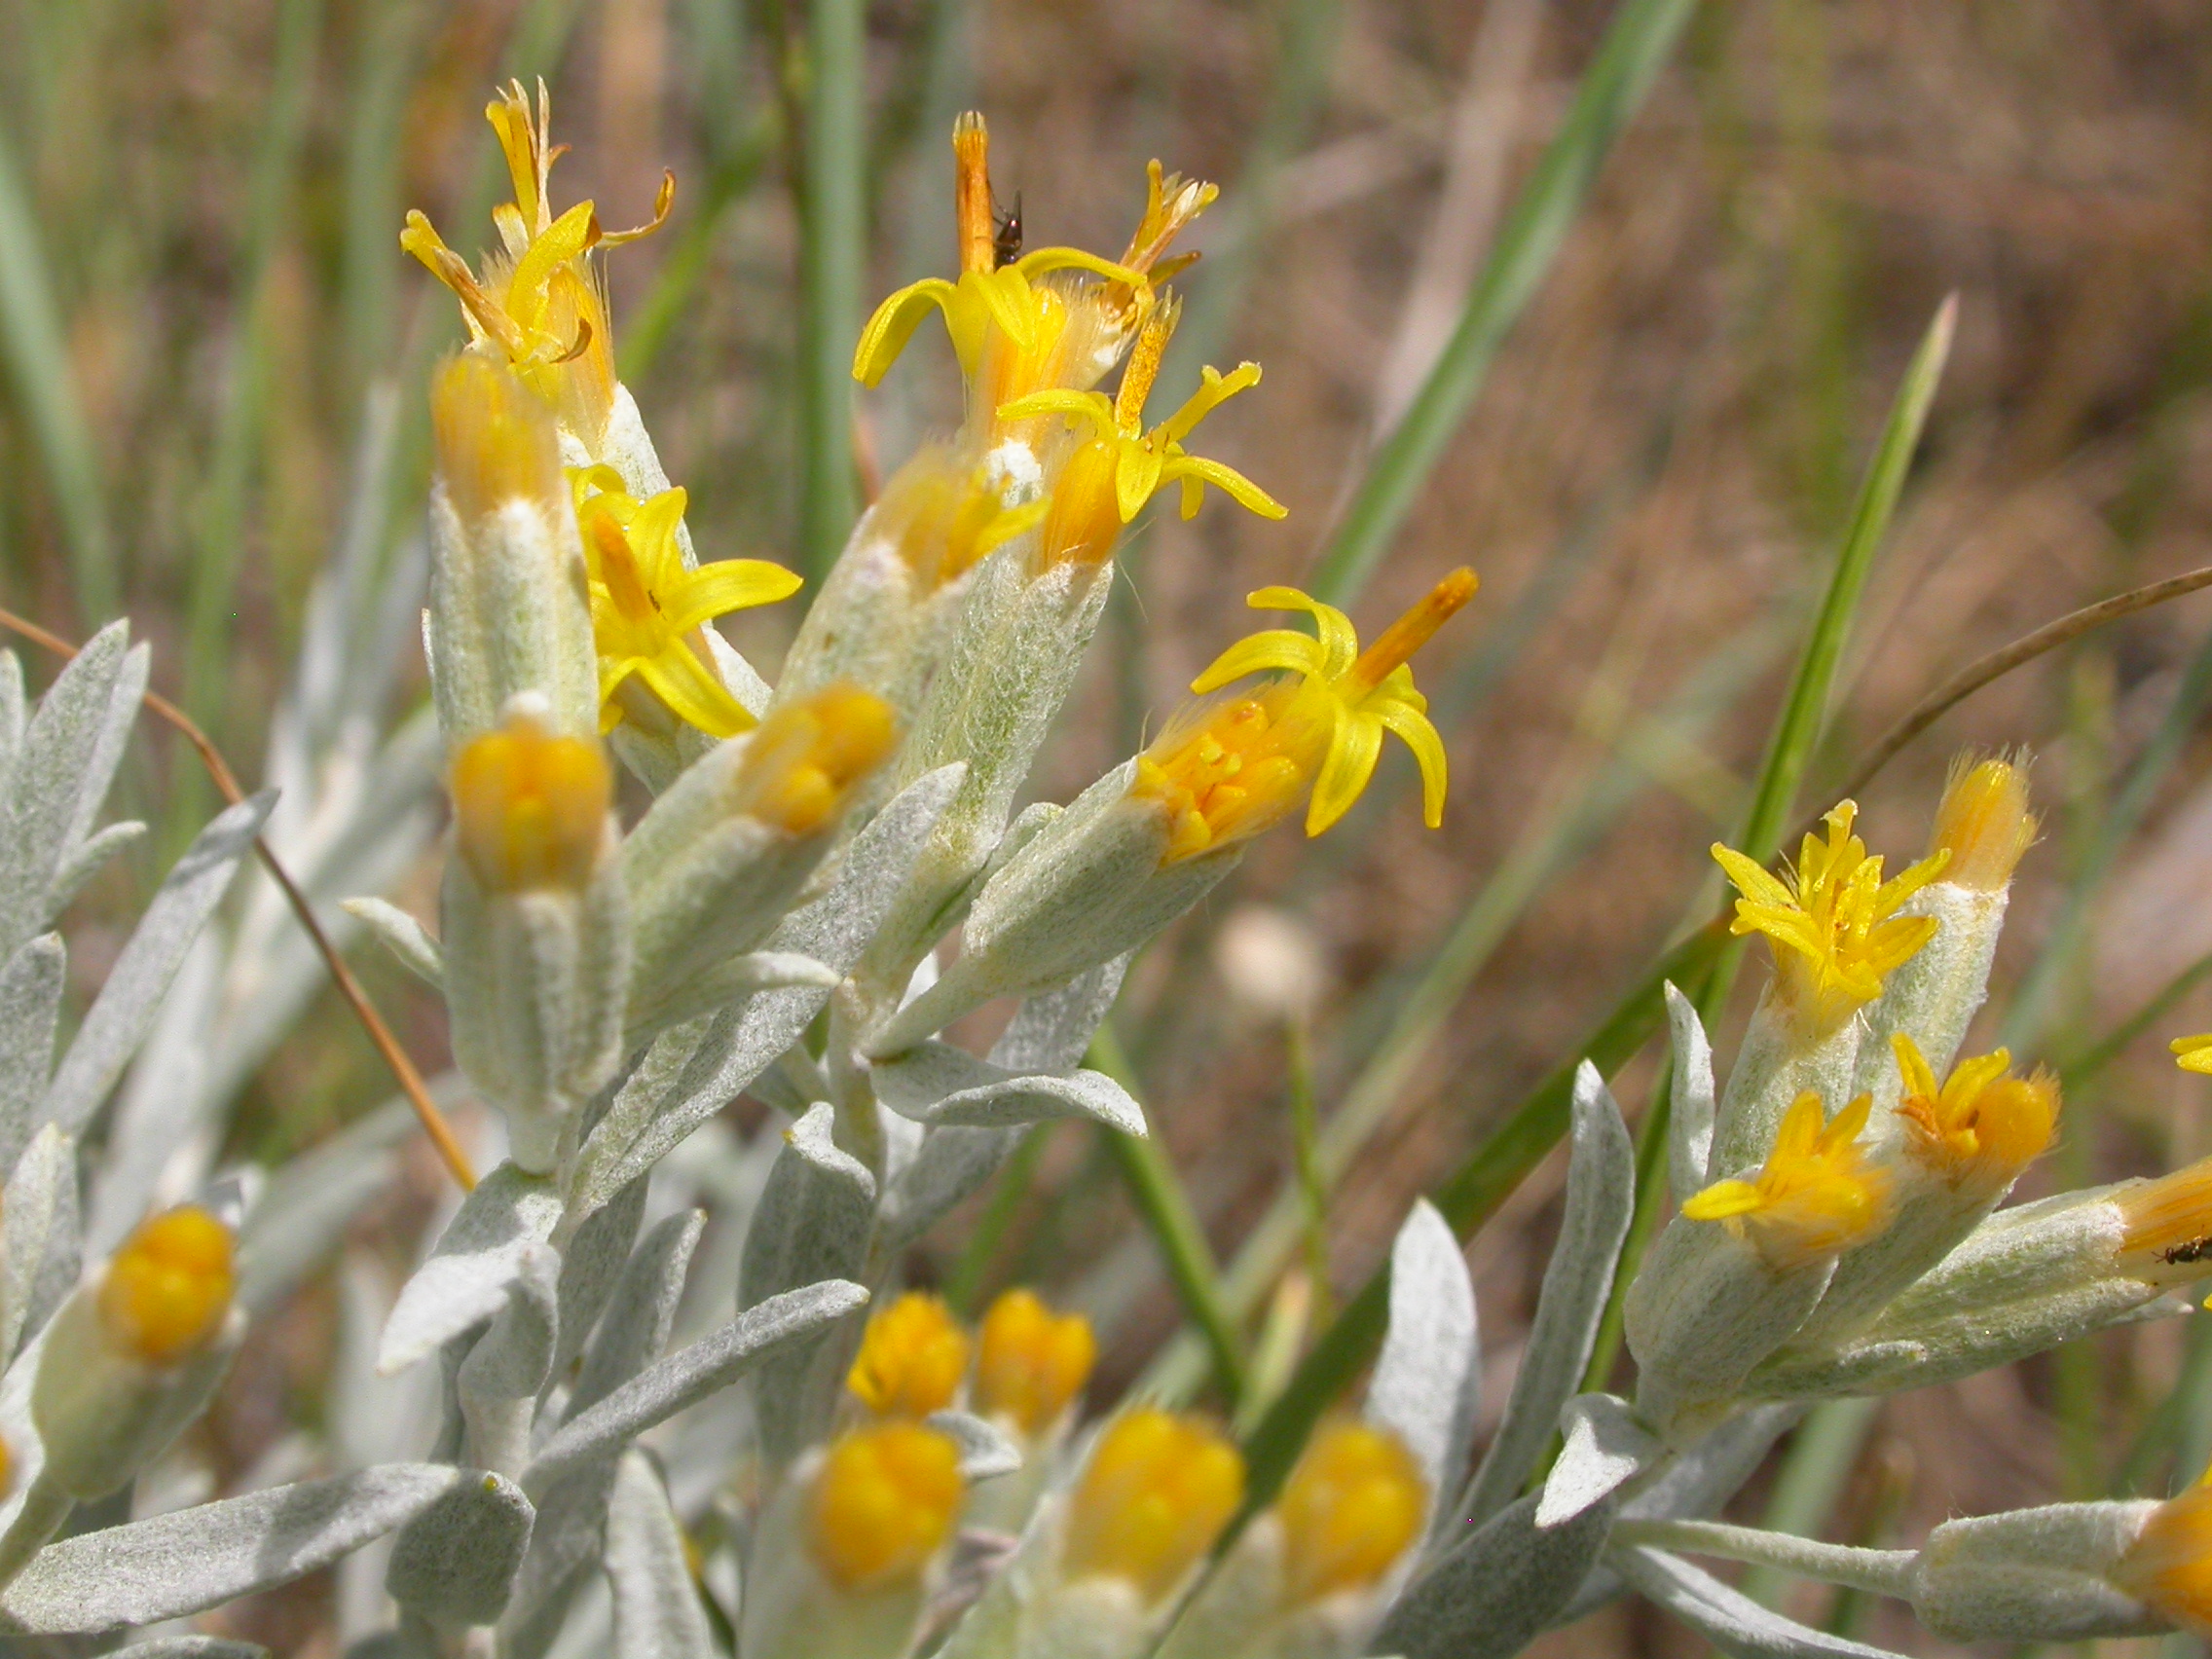 Yellow flowers with silvery-green foliage